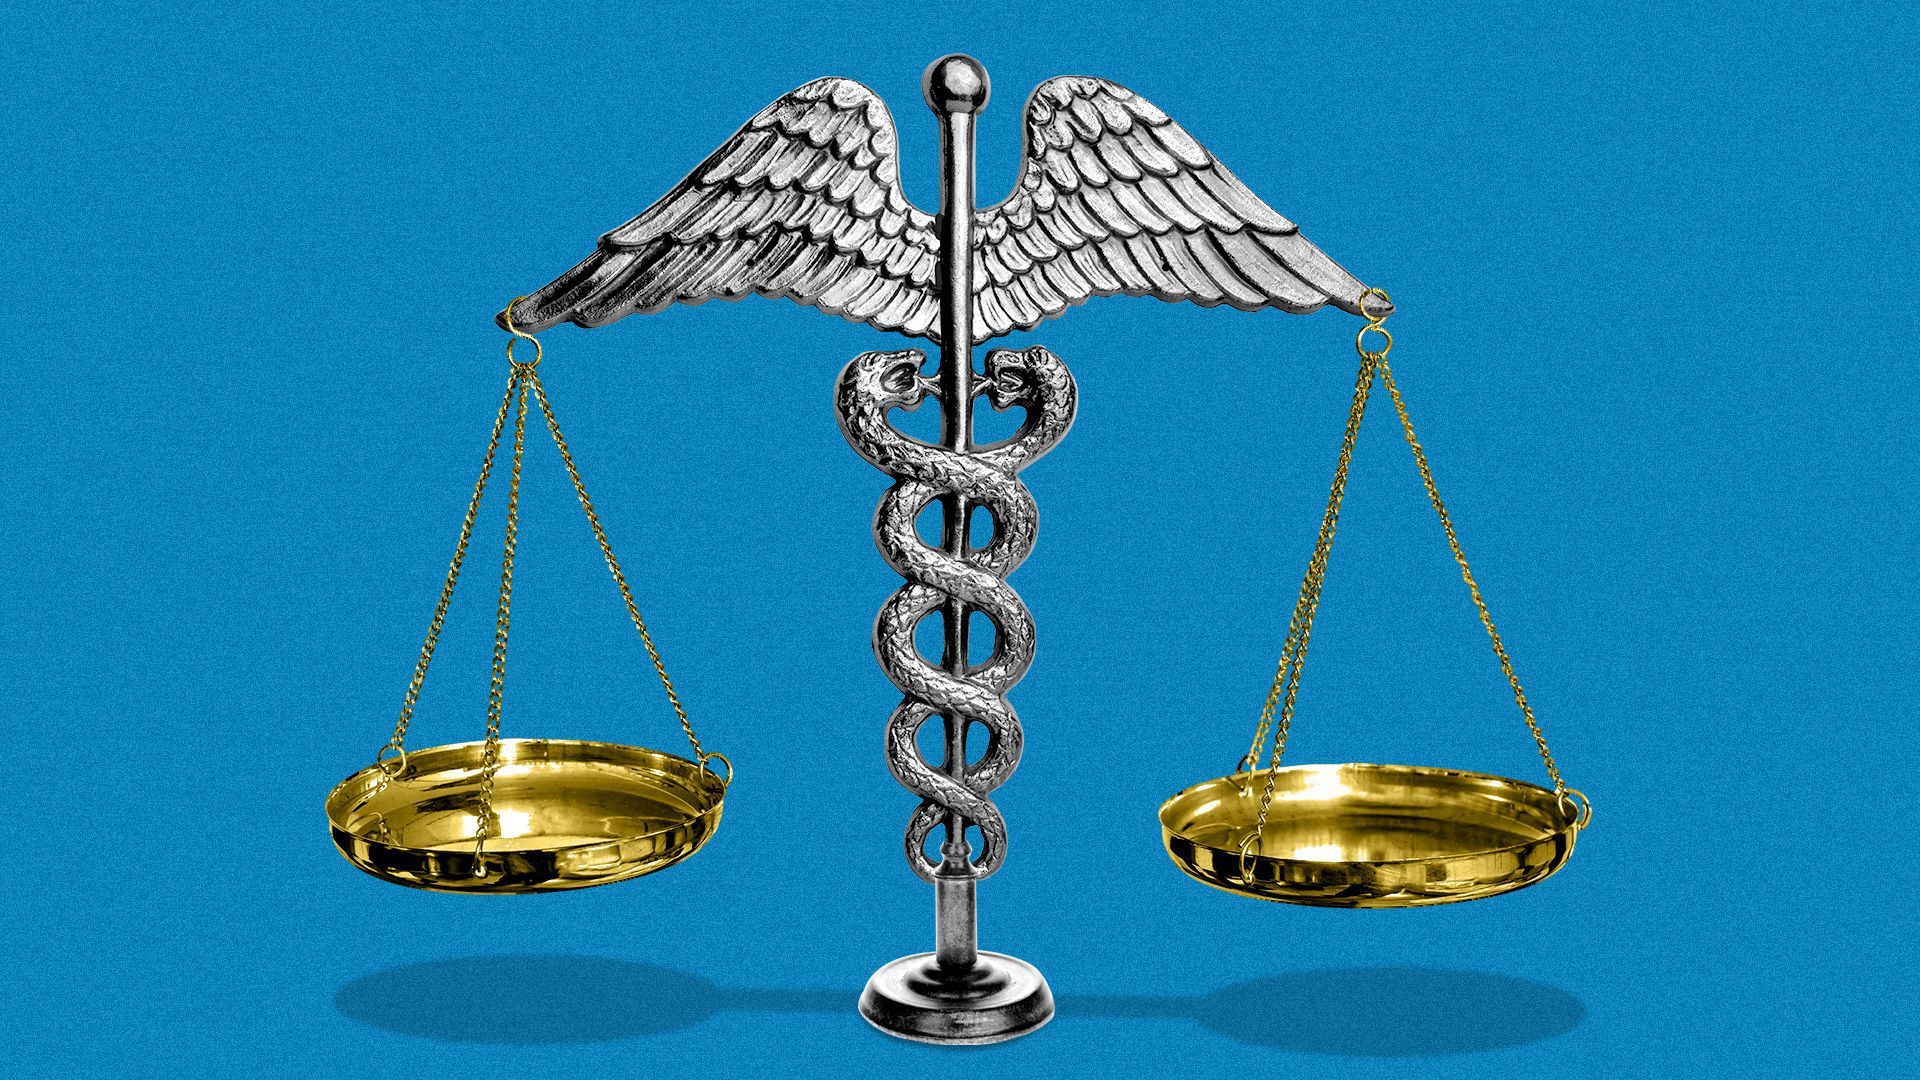 A caduceus with two gold plates from a scale of justice hanging from the wings of the staff